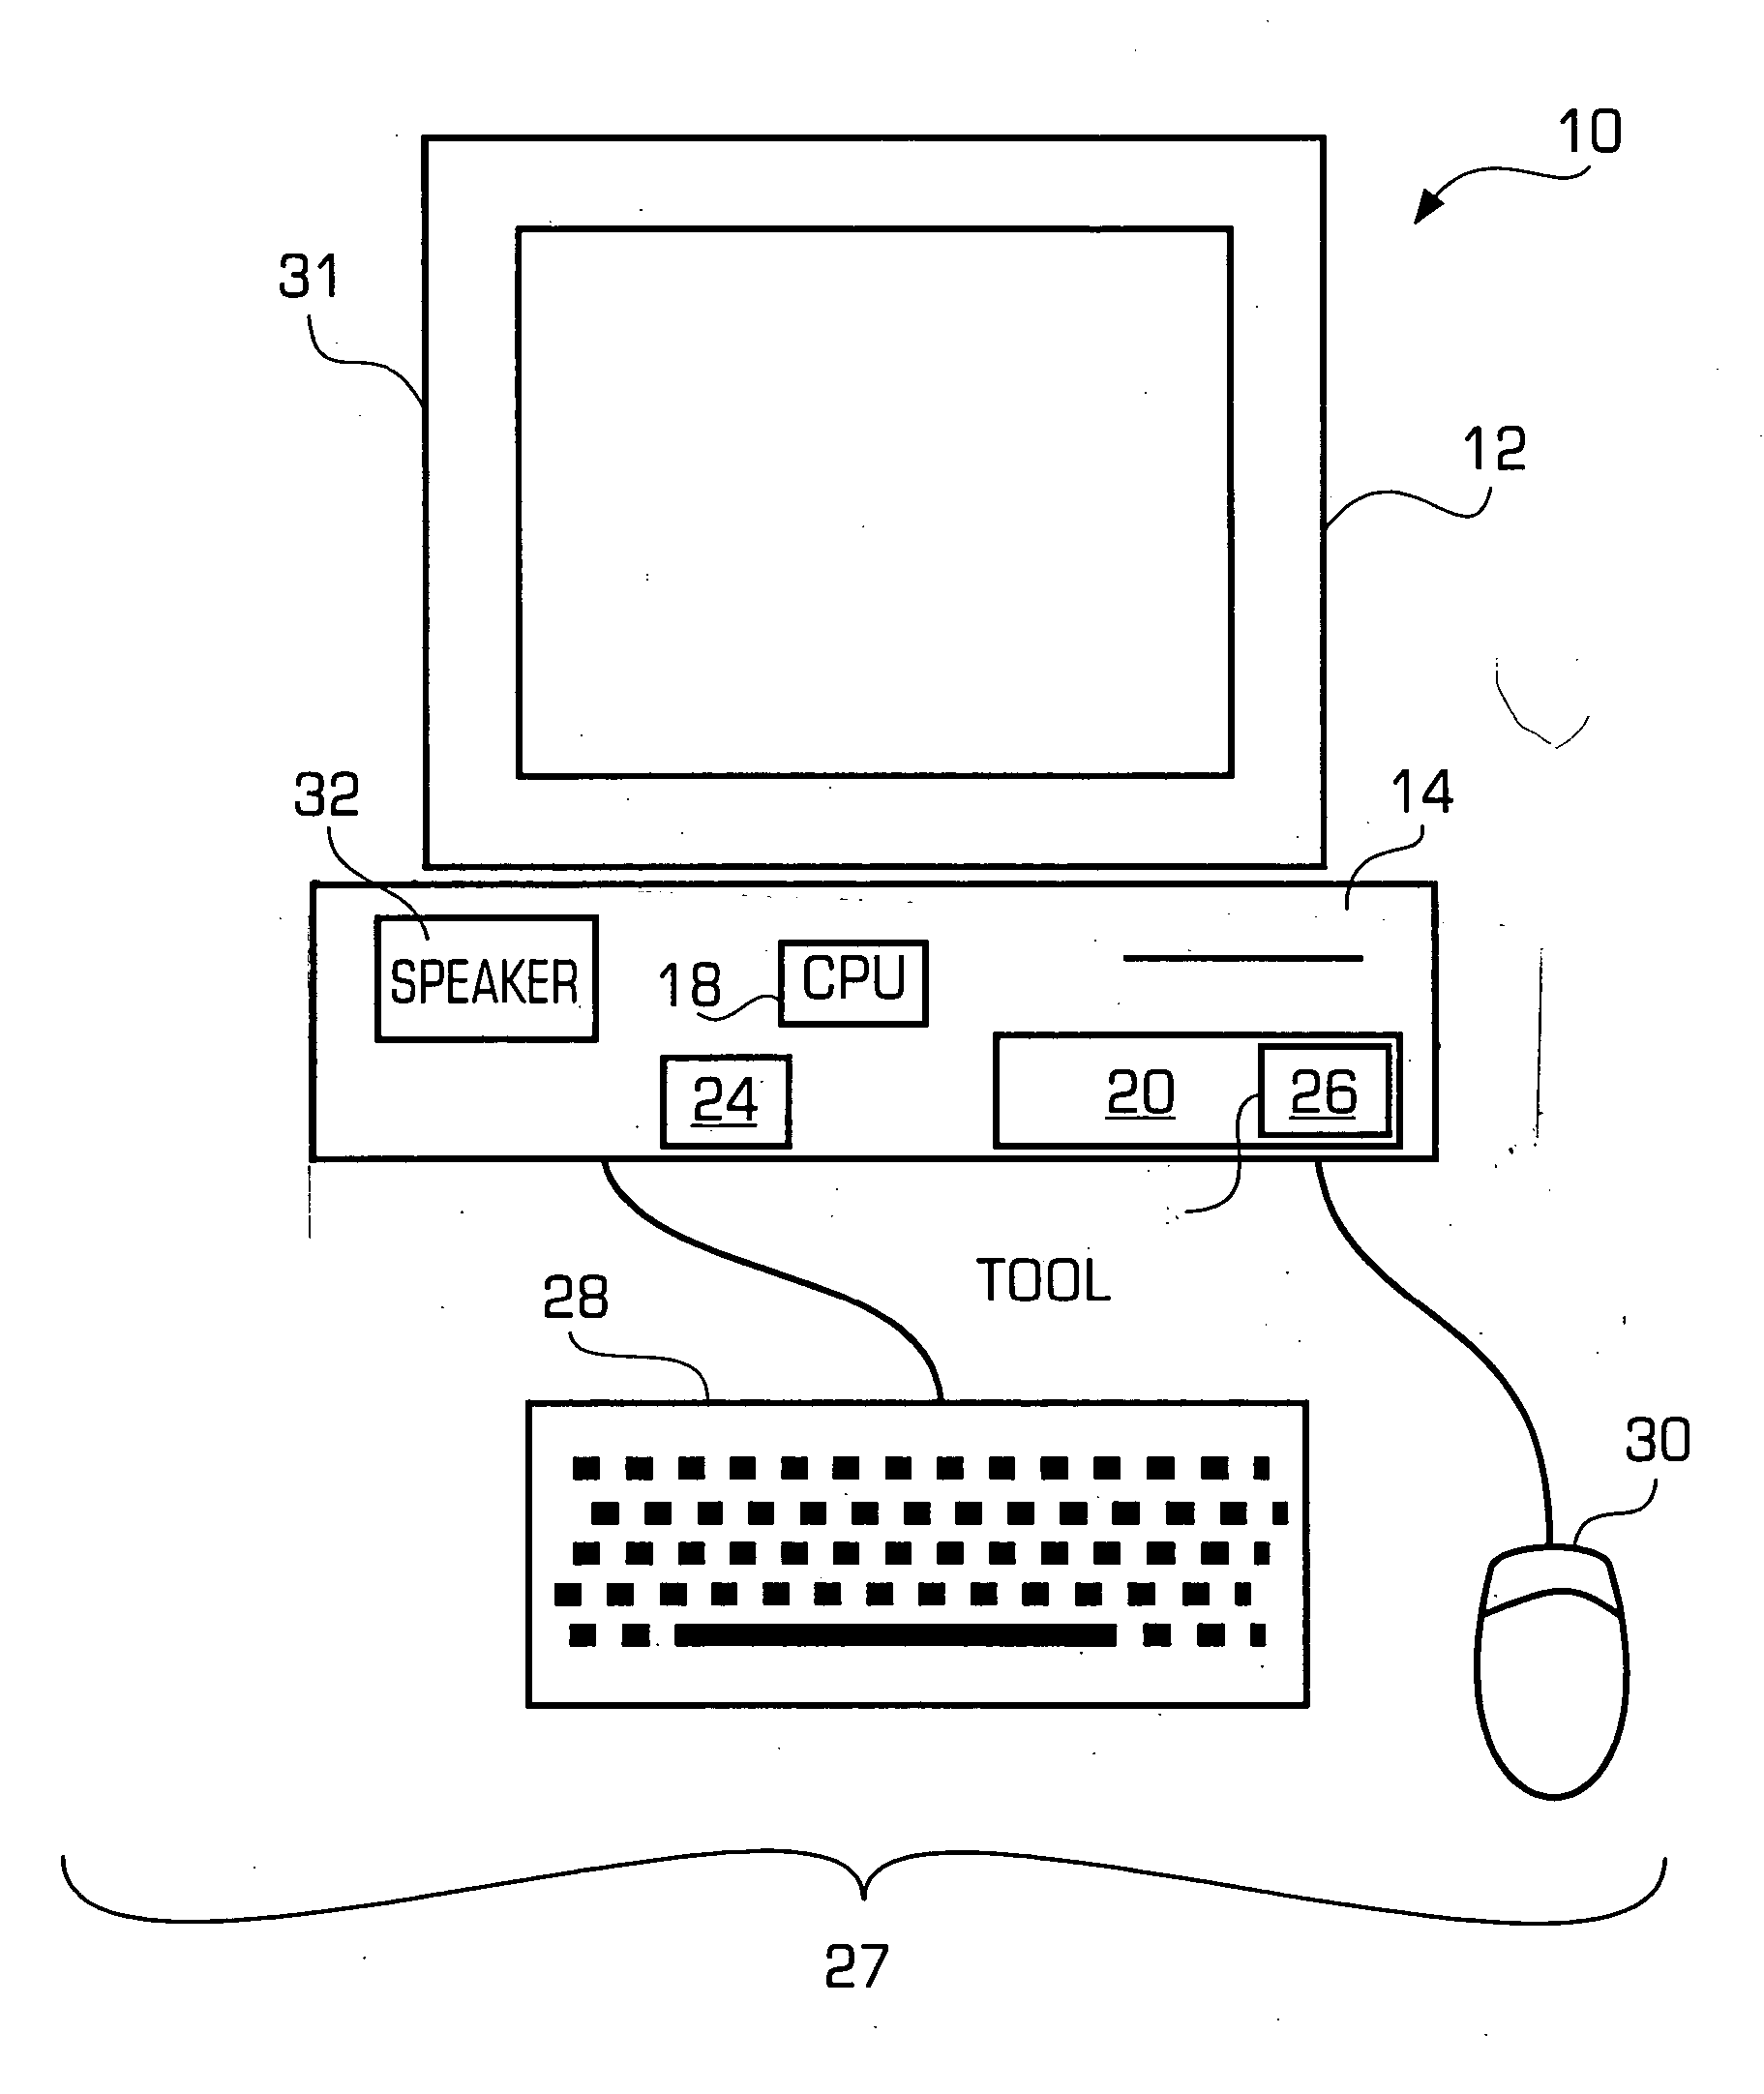 System and method for creating designs for over the phone voice enabled services